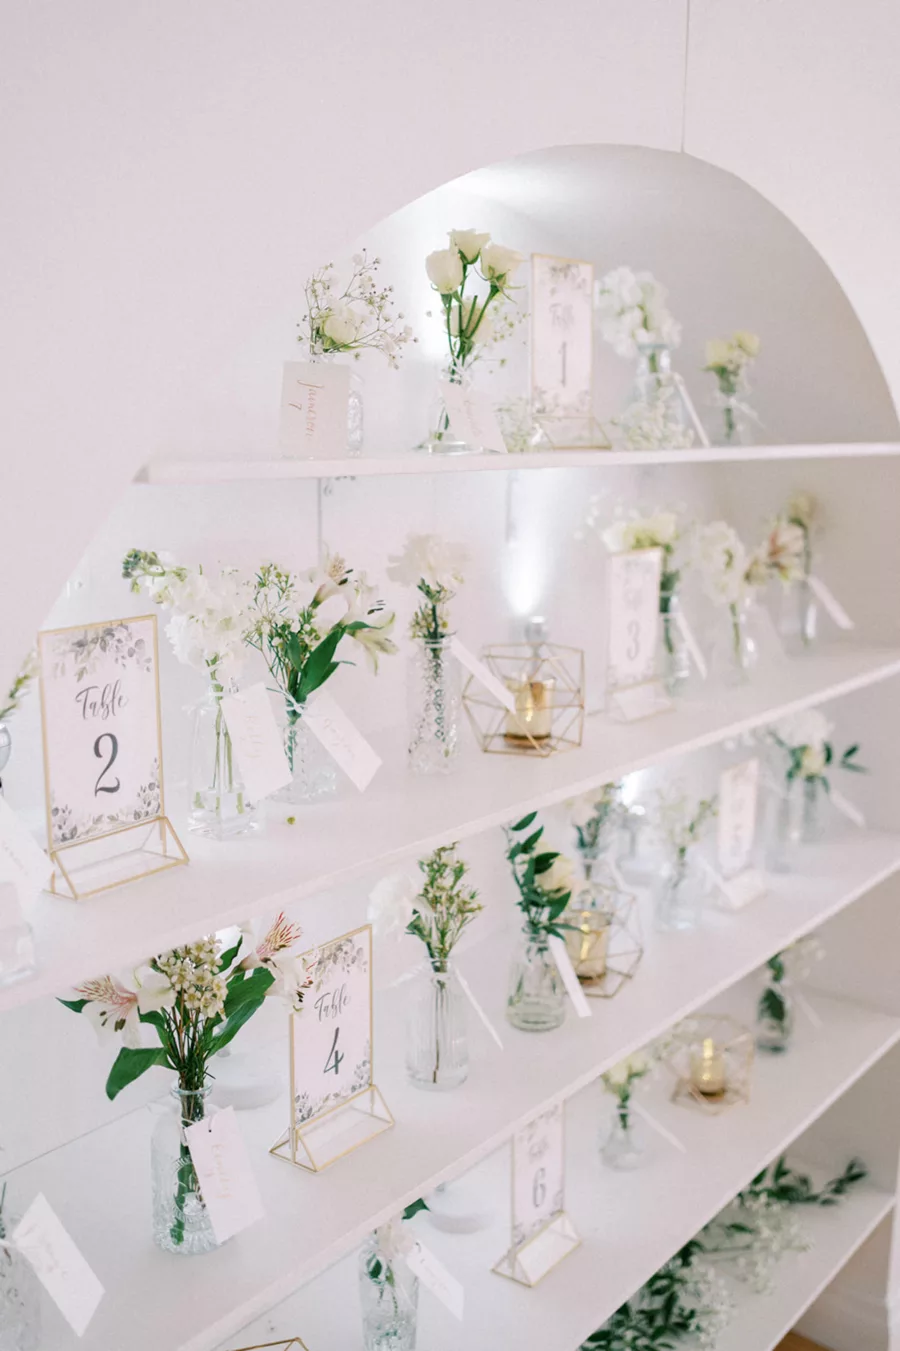 Modern White and Gold Wedding Reception Seating Chart Shelves with Bud Vase Place Cards Inspiration